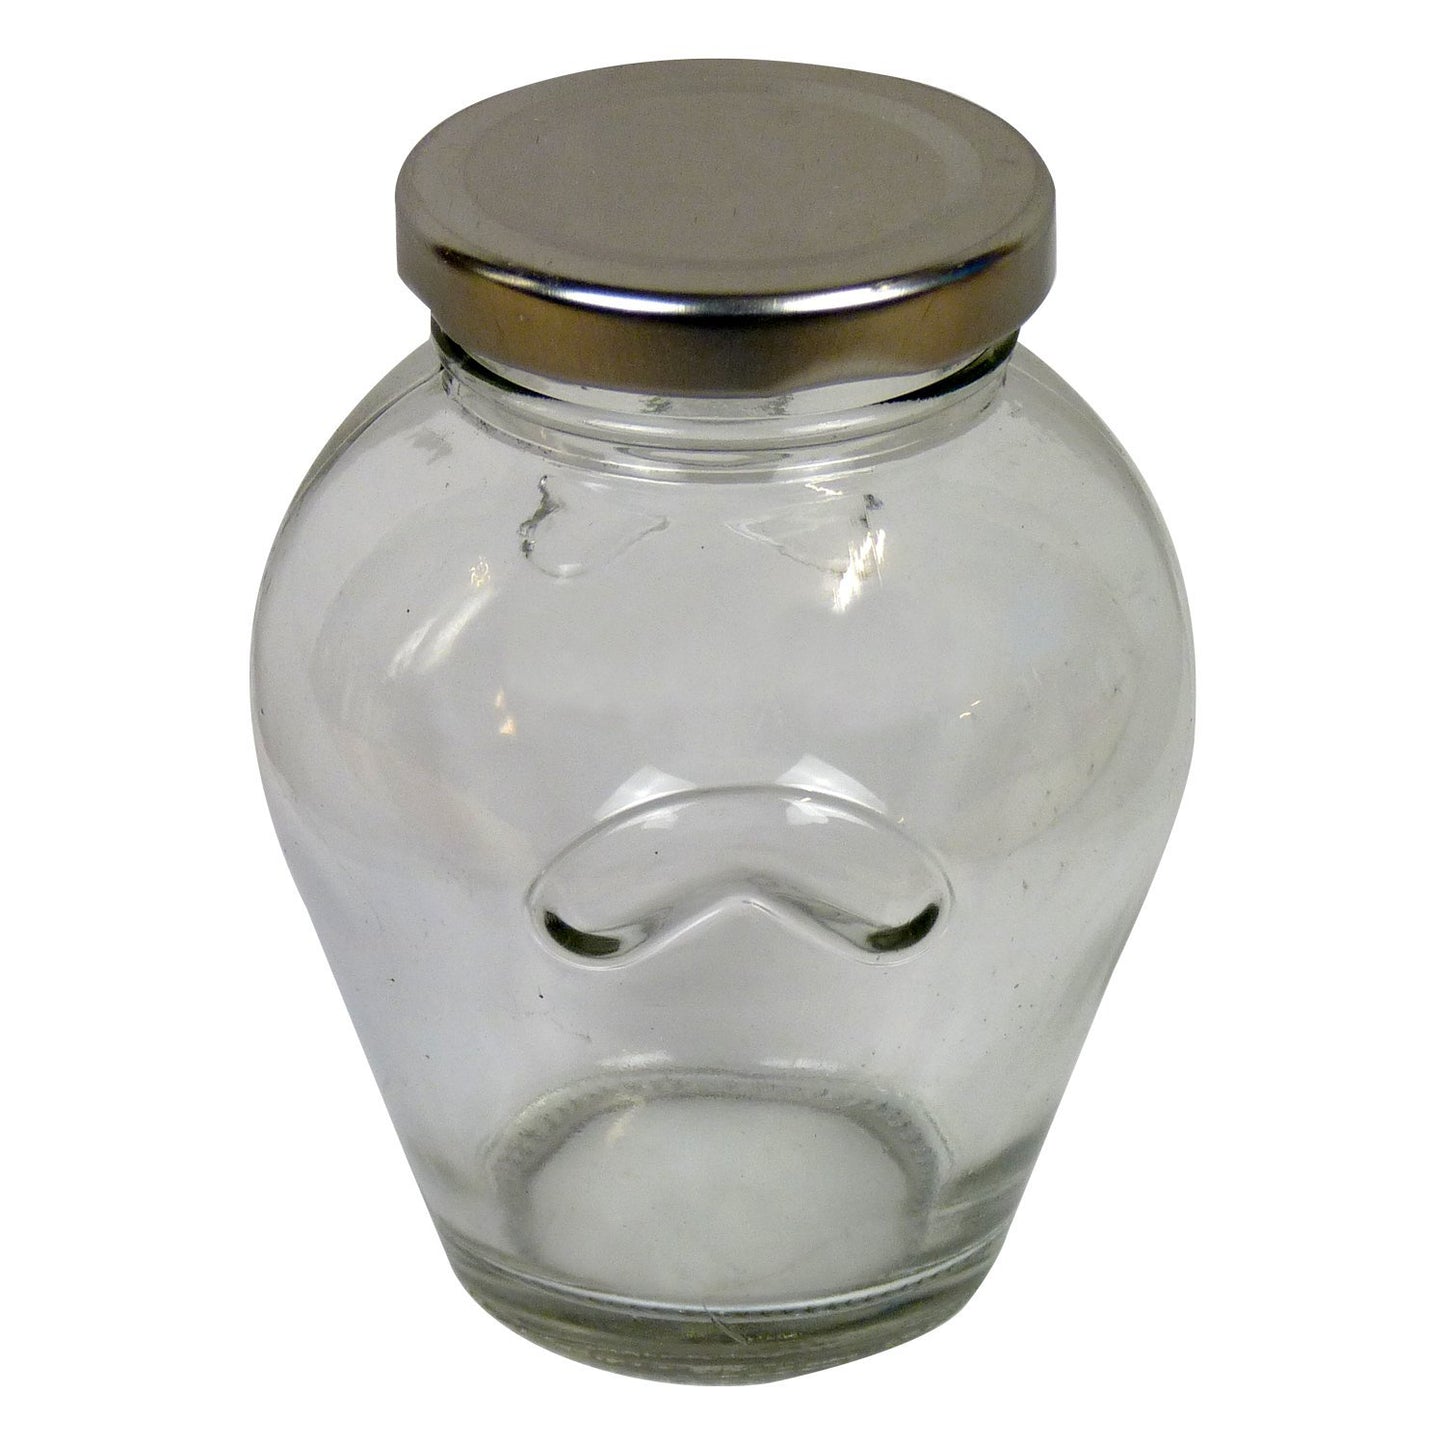 Orcio Glass Jar, 4 oz, 48 pack with Lids